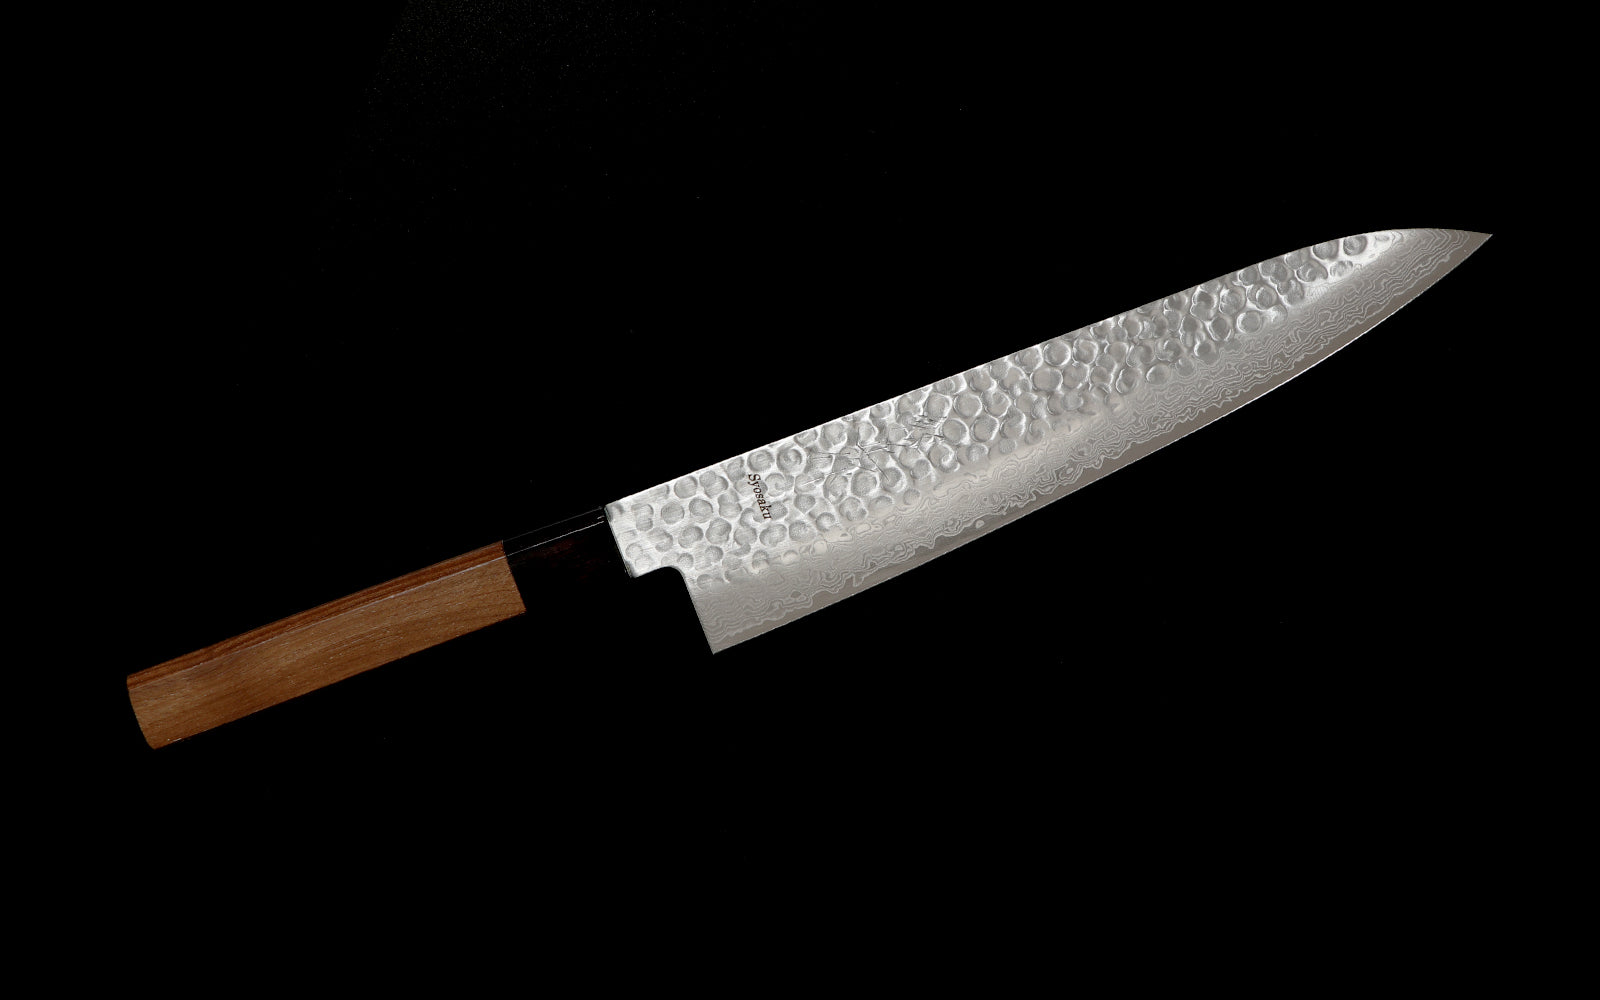 Japanese vs. German Knives: Which One Is Right for Your Kitchen